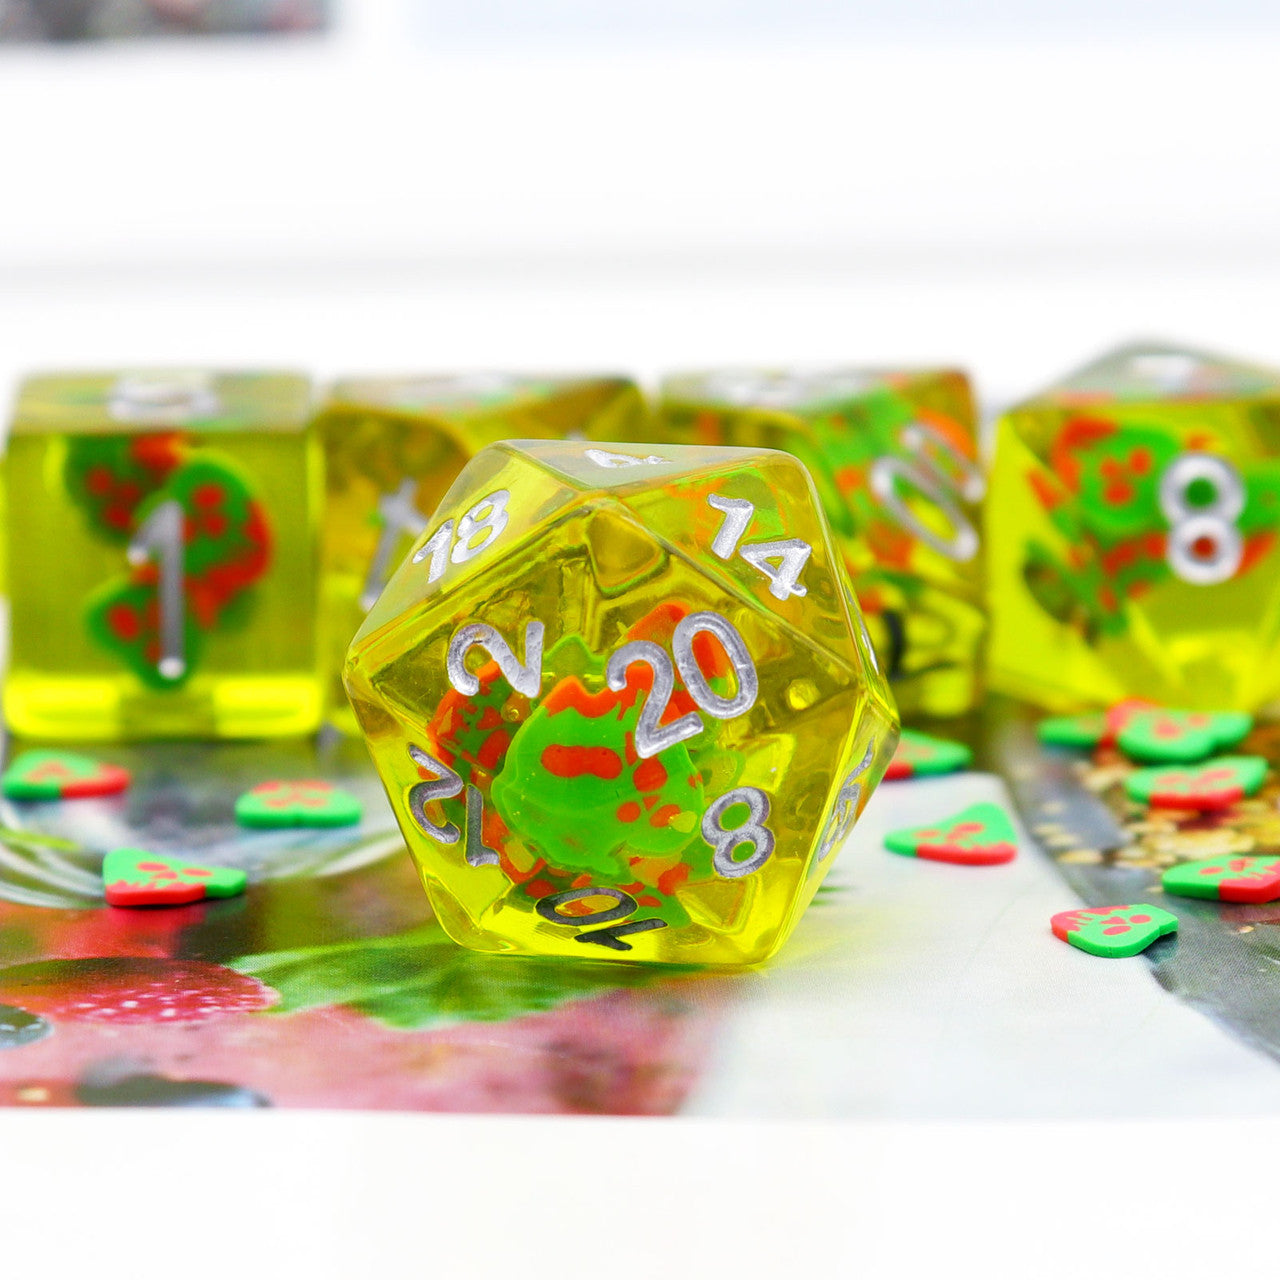 red green dice, yellow dice, olive dice, dnd die, rpg dice, resin dice, filled dice, filled resin dice, dice set, dnd dice set, rpg dice set, haxtec dice, ghost face dice, ghost dice, halloween dice, spirit dice